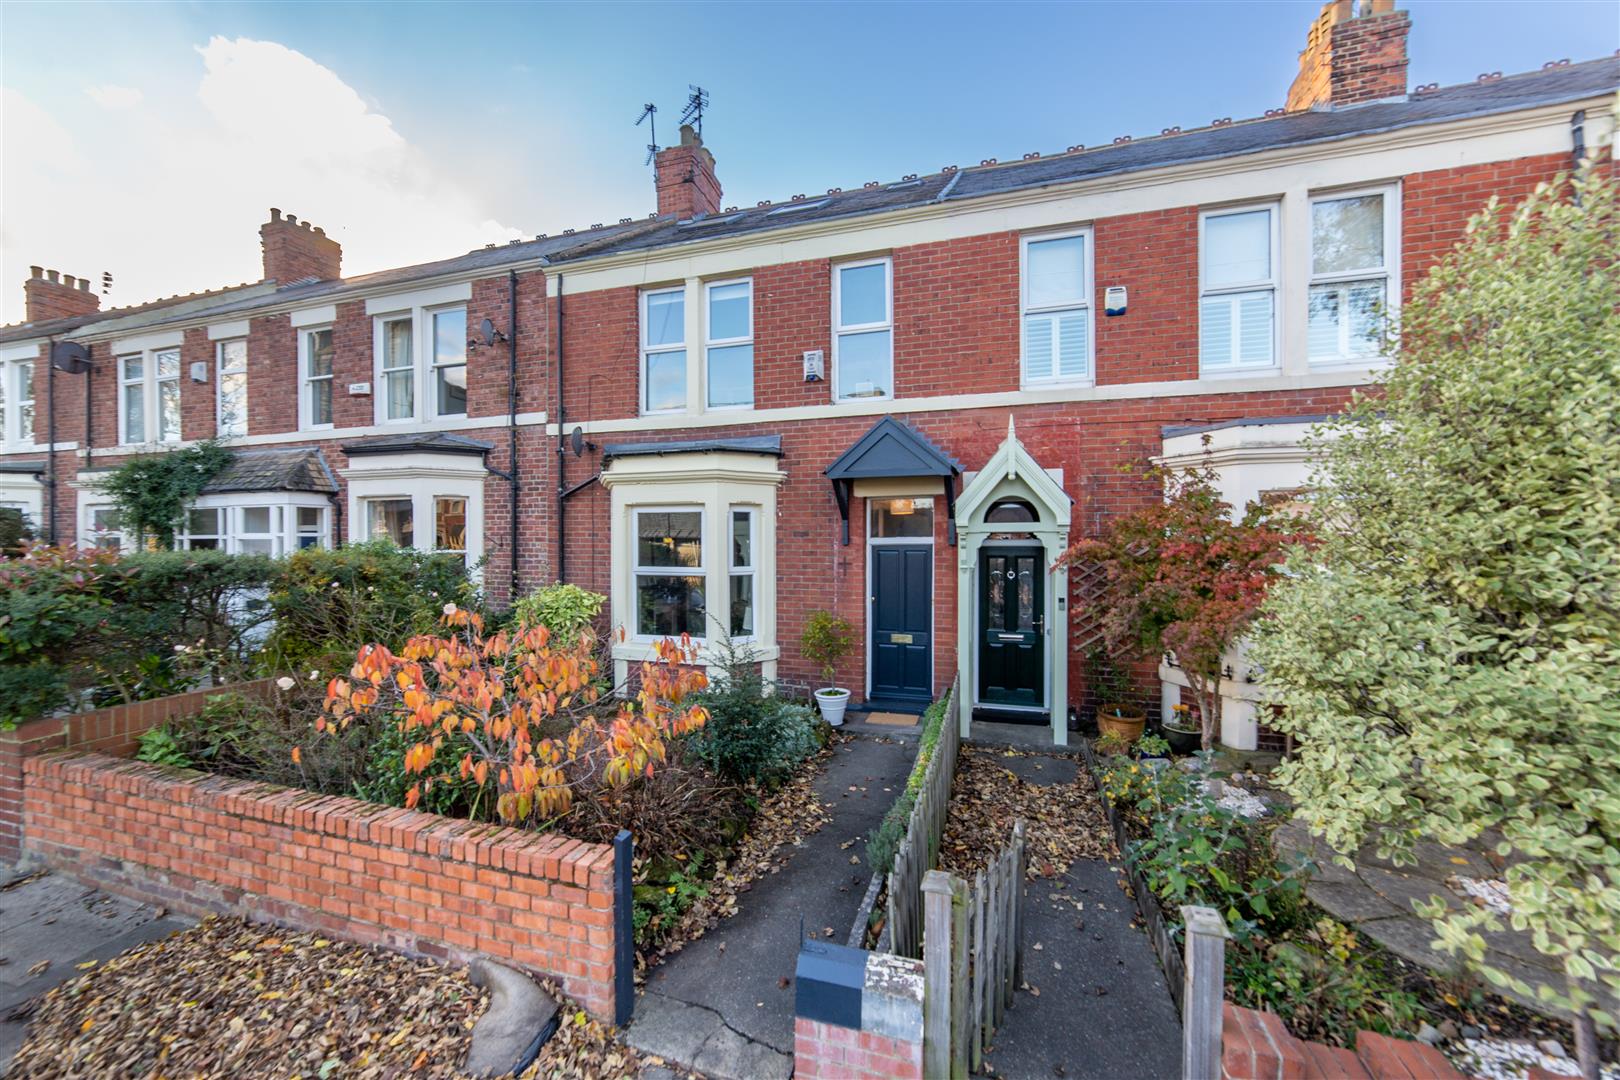 5 bed terraced house for sale in Rothwell Road, Gosforth - Property Image 1